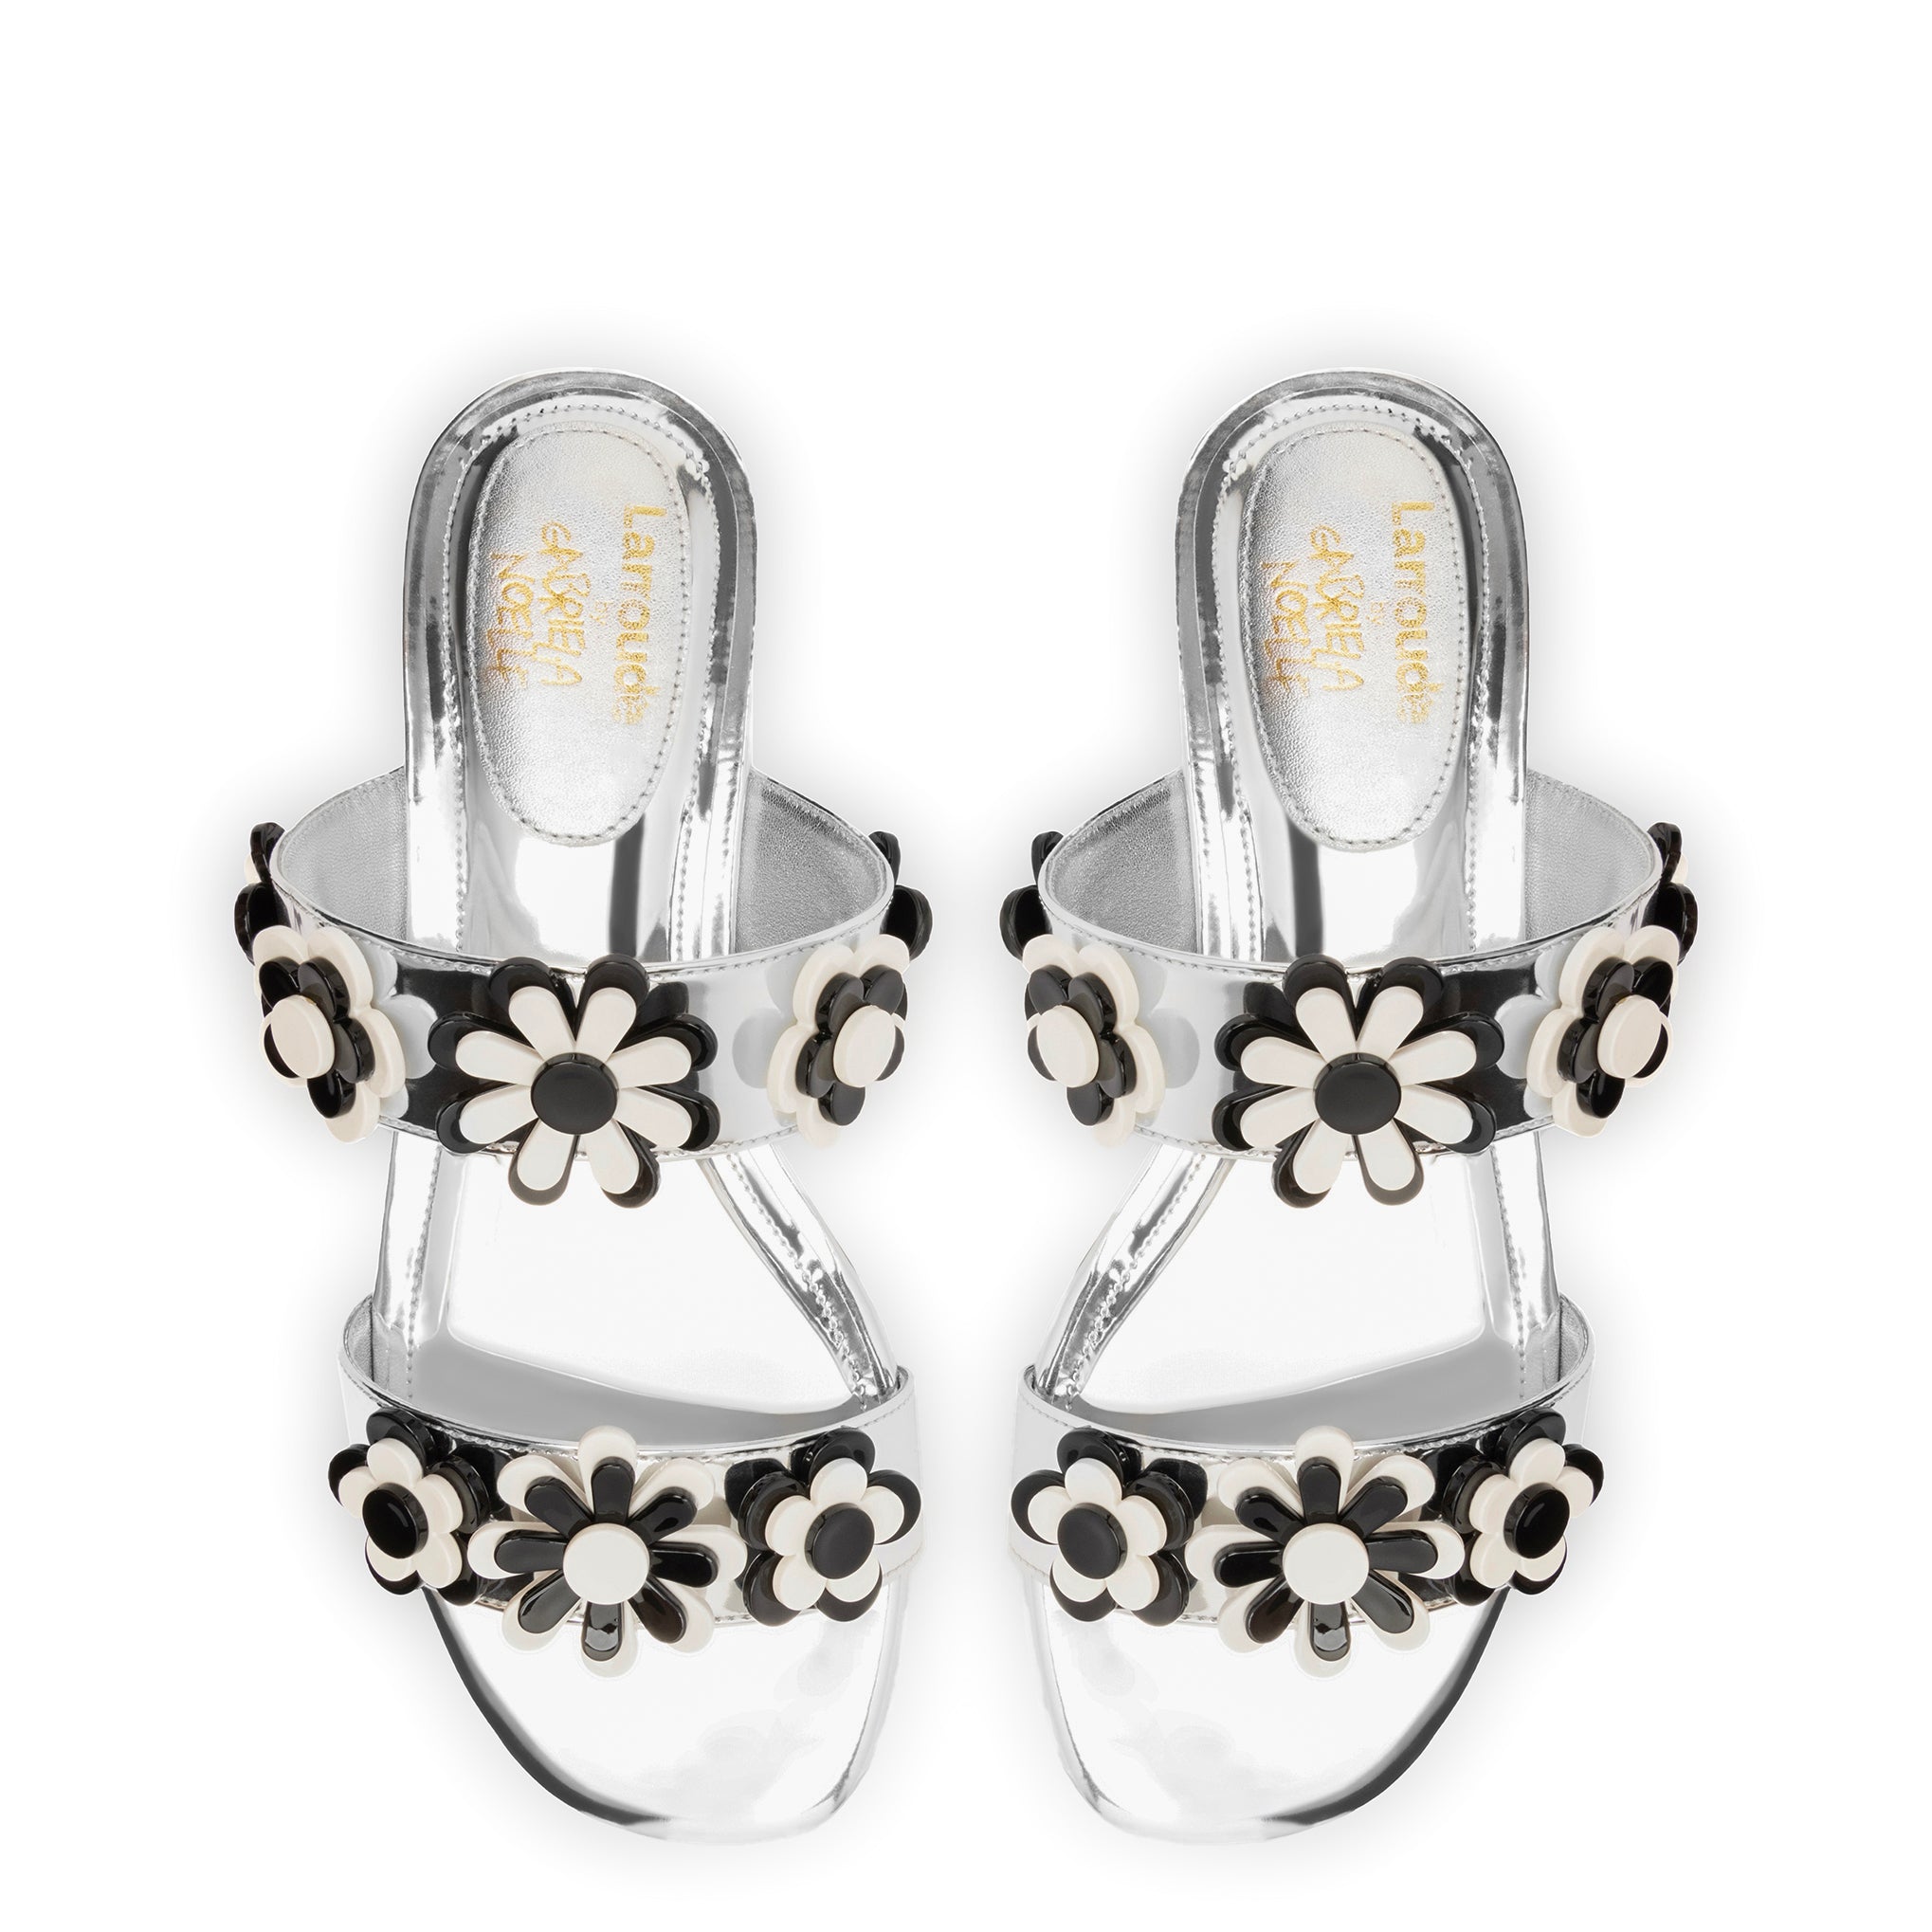 Larroudé x Gabriela Noelle: Blossom Flat Sandal In Silver Specchio and Black and White Acrylic